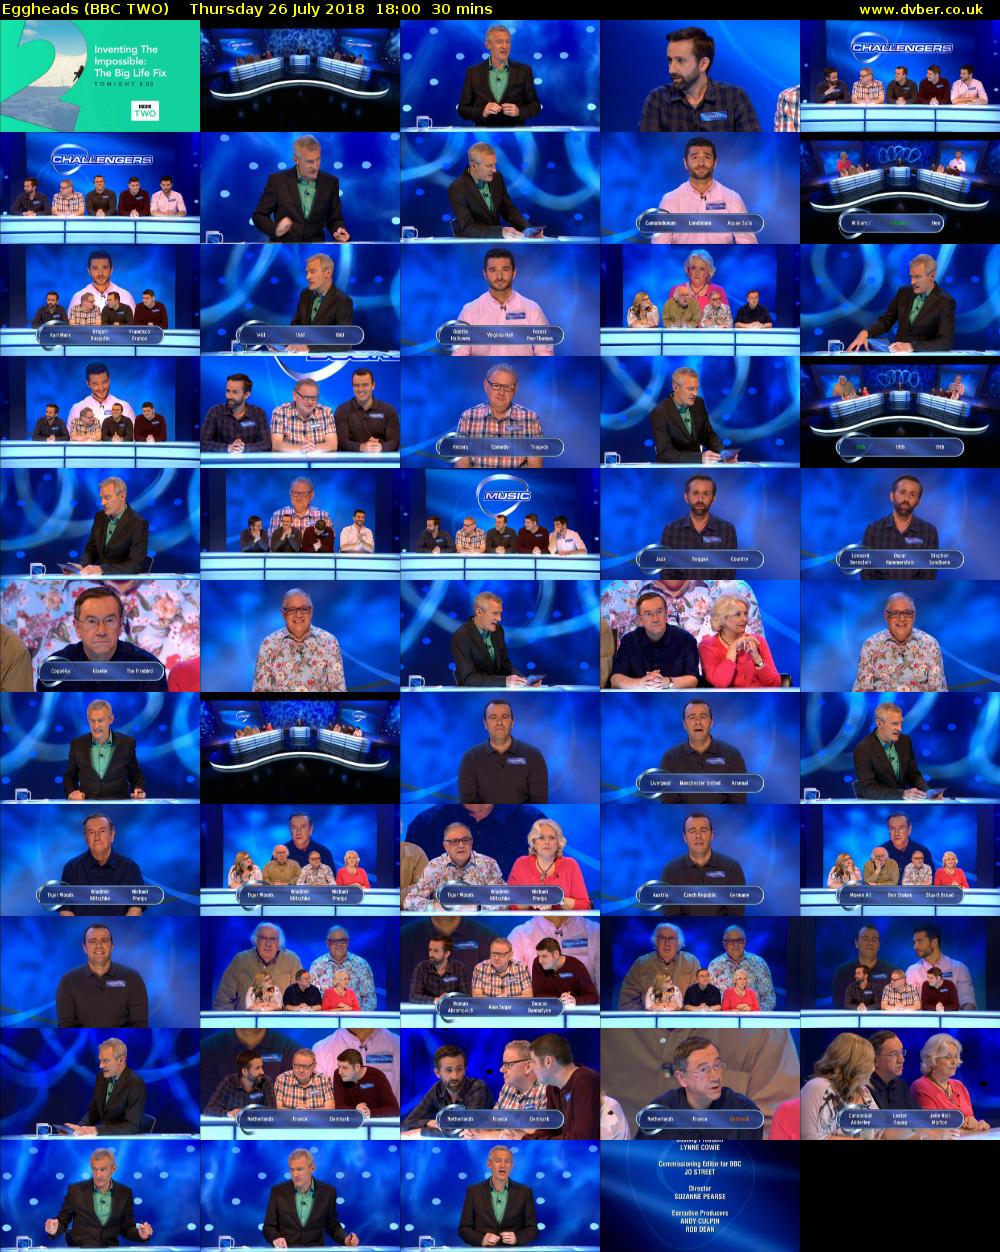 Eggheads (BBC TWO) Thursday 26 July 2018 18:00 - 18:30